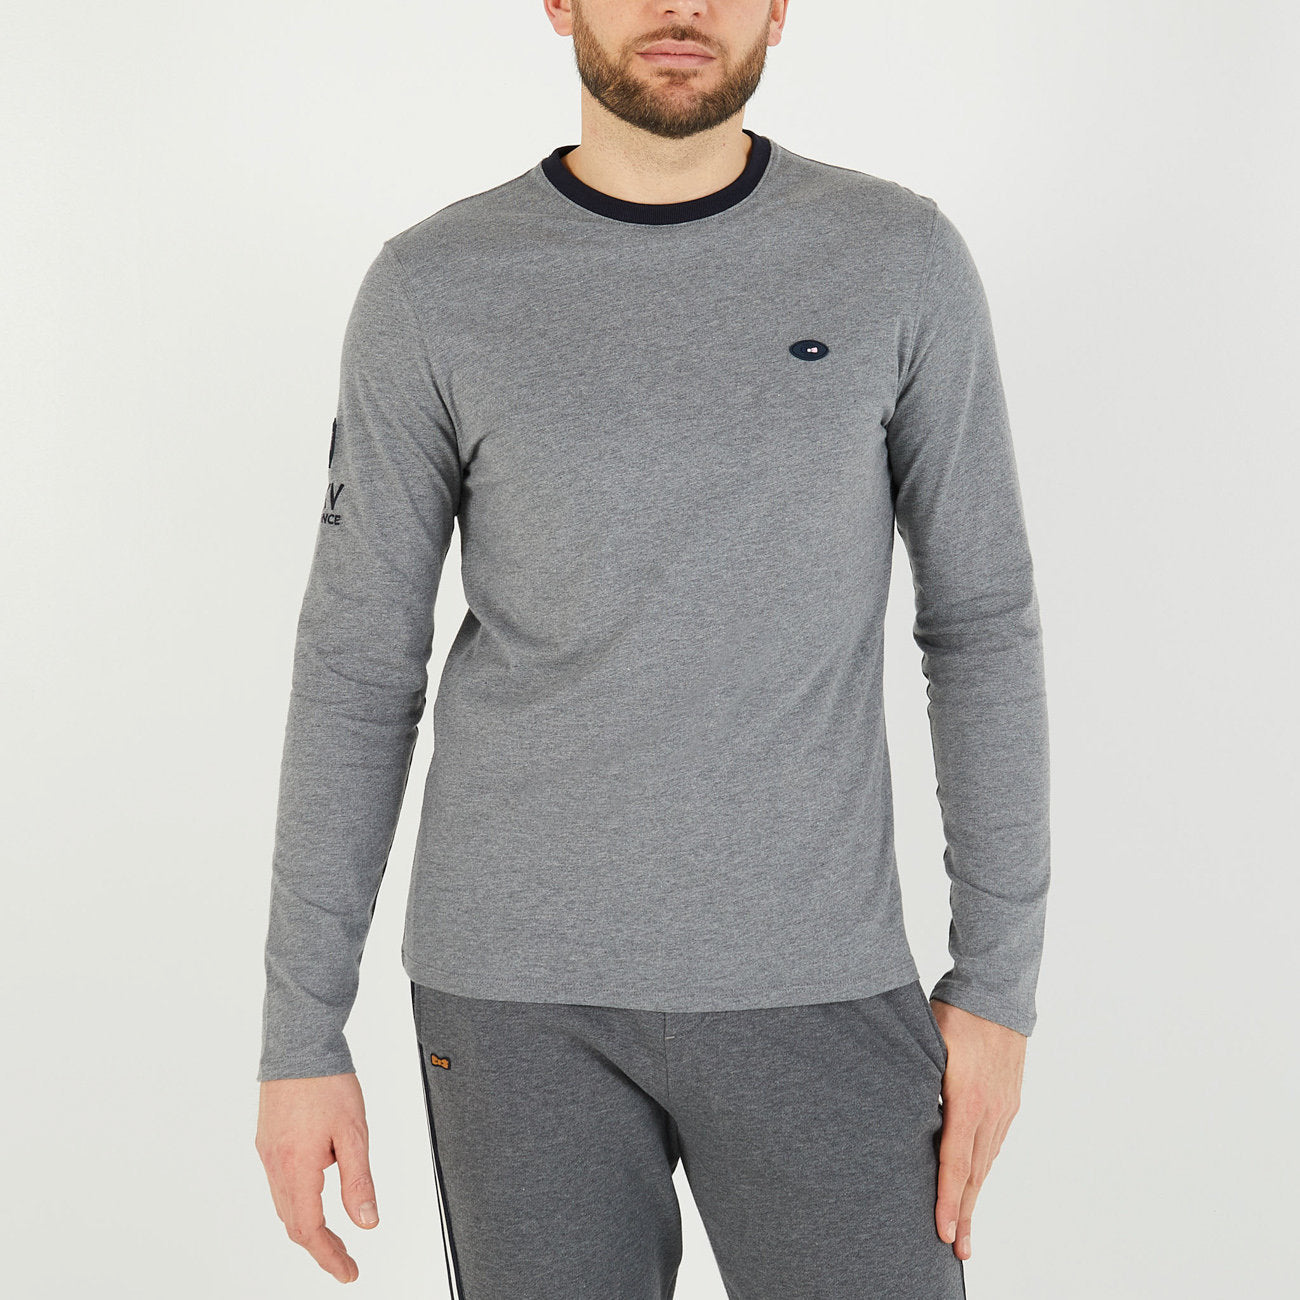 Grey Long-Sleeved Polo With Xv De France Embroidered Detail_H23MAITL0013_GRM_01